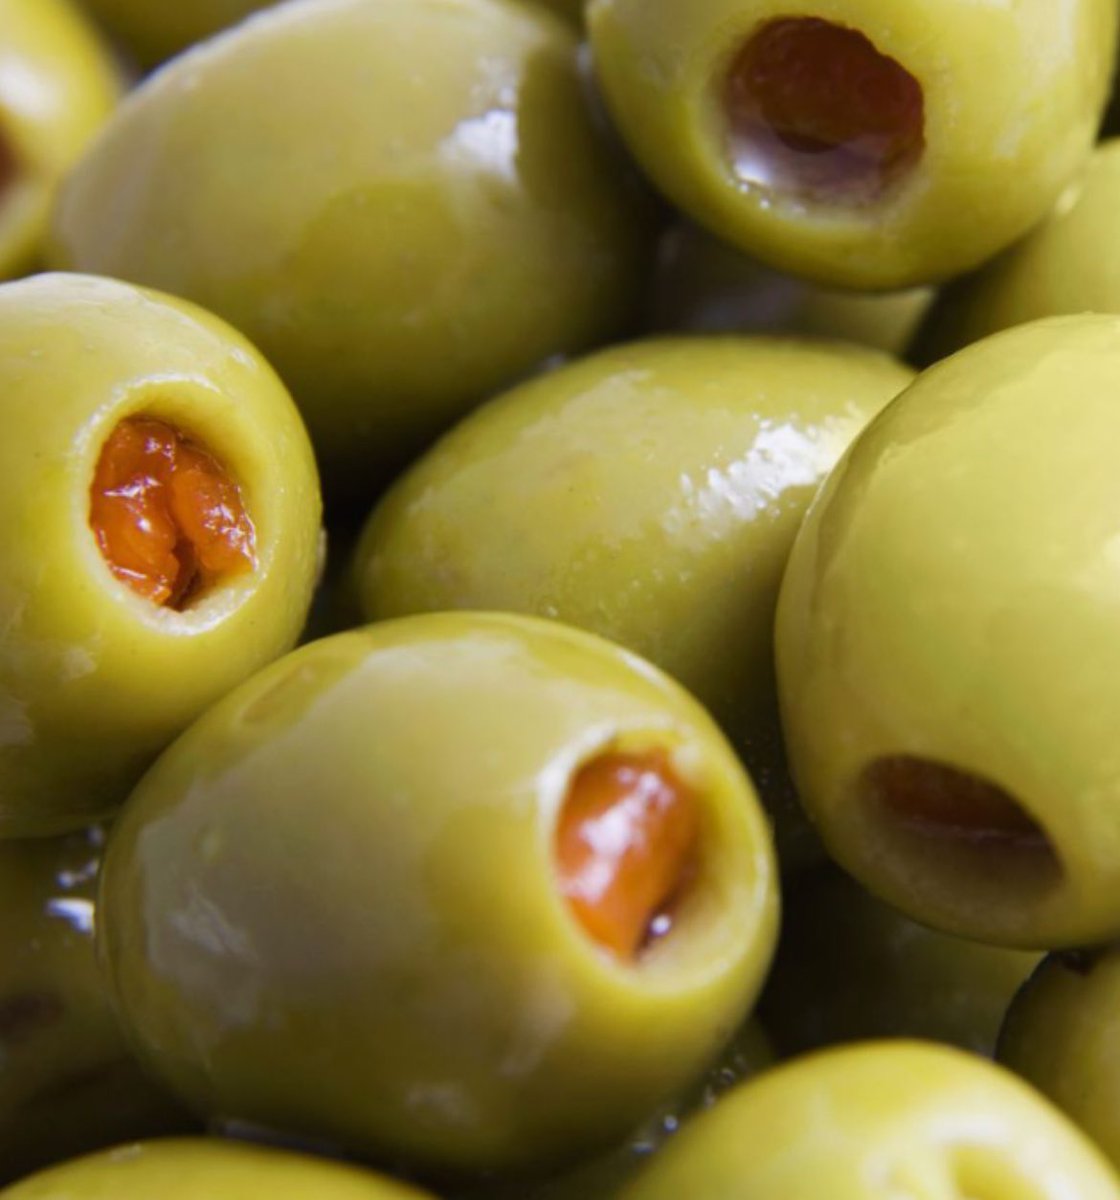 Green olives are the last food on earth. Do you eat it or starve?